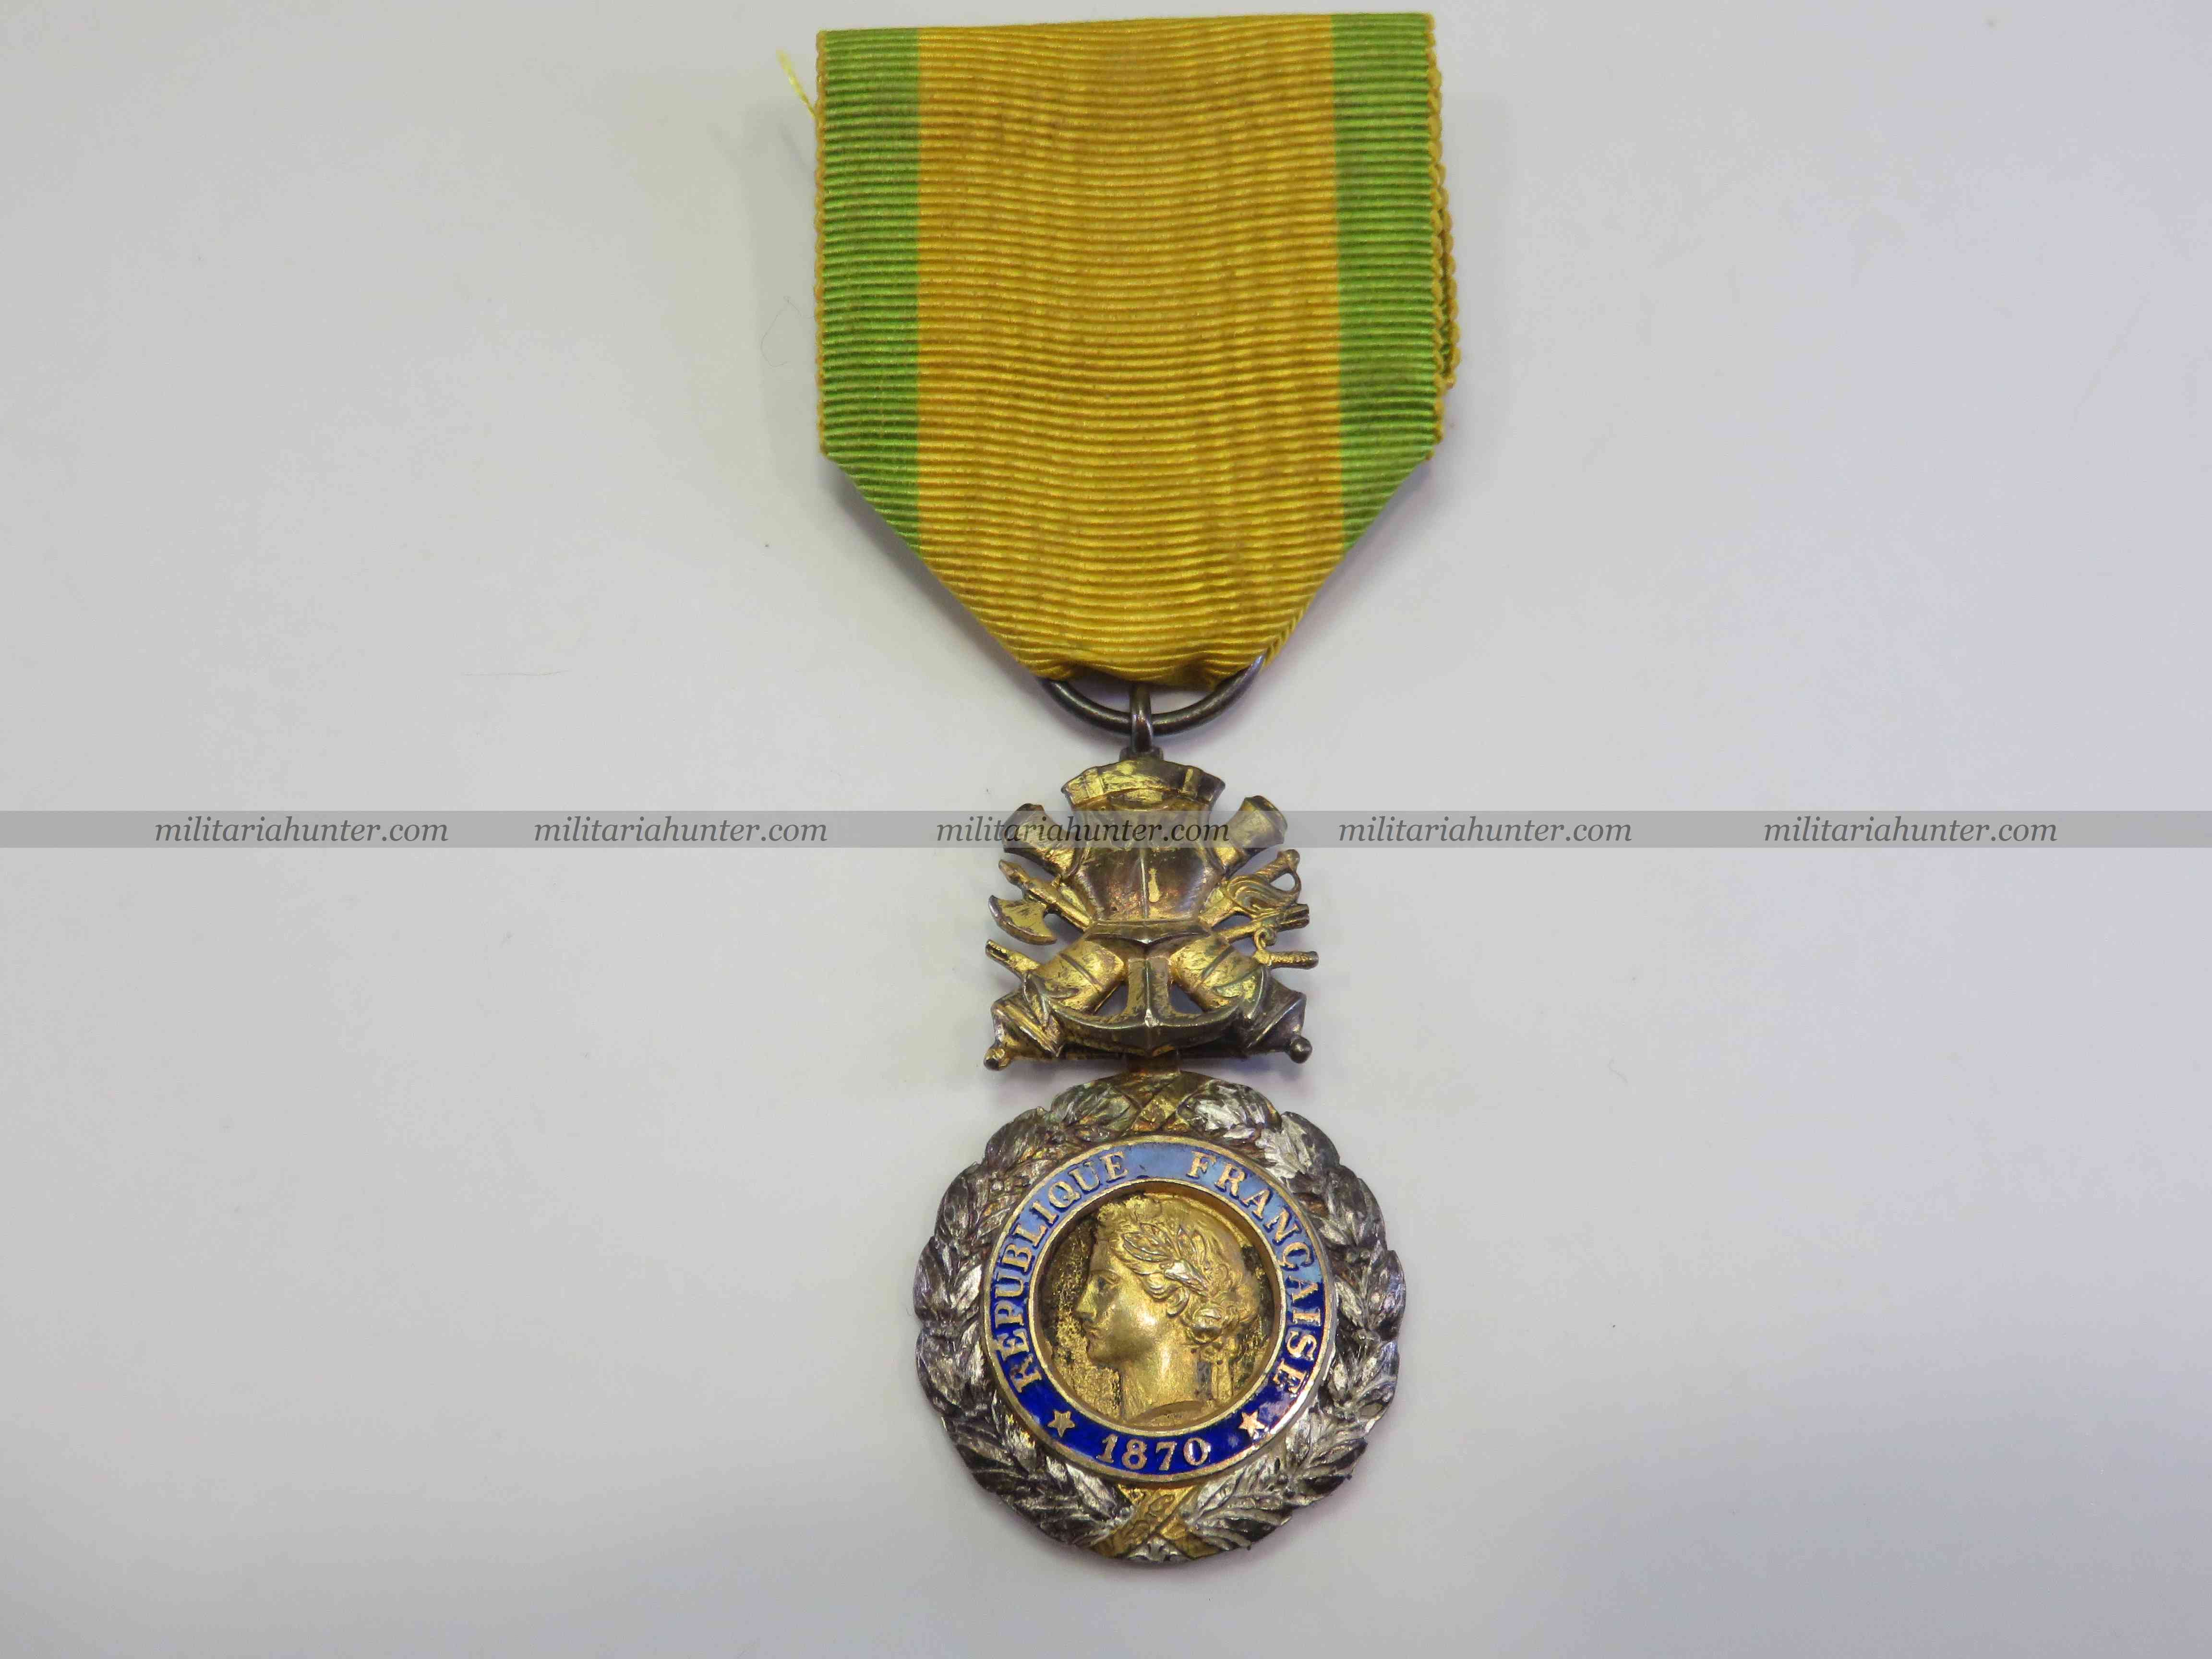 militaria : French ww1 and IIIrd Republic military medal - médaille militaire